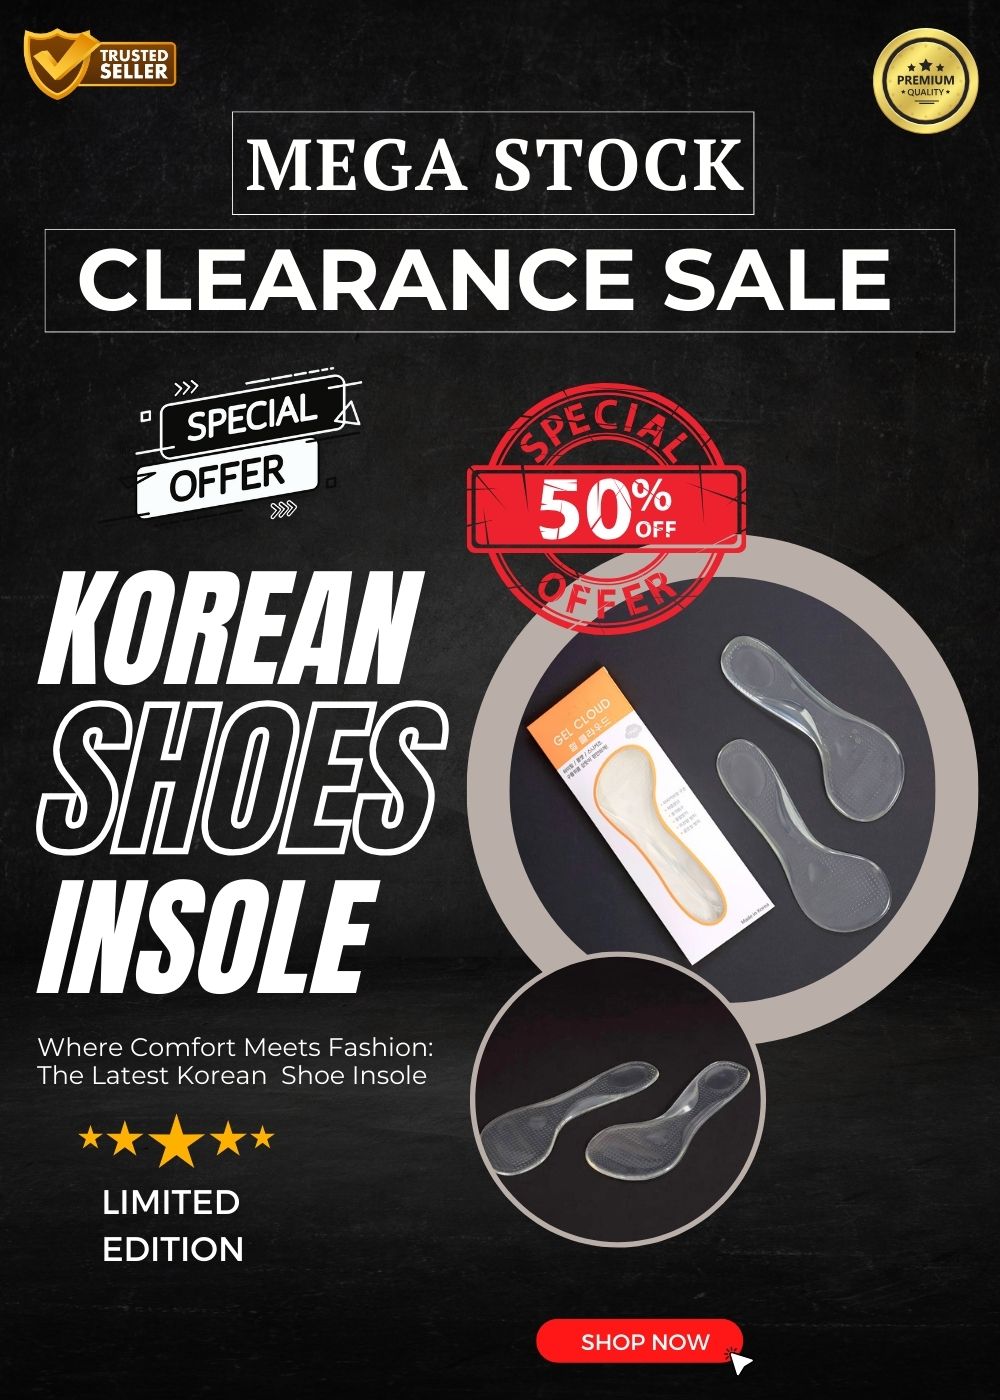 shoe insole mobile banner 